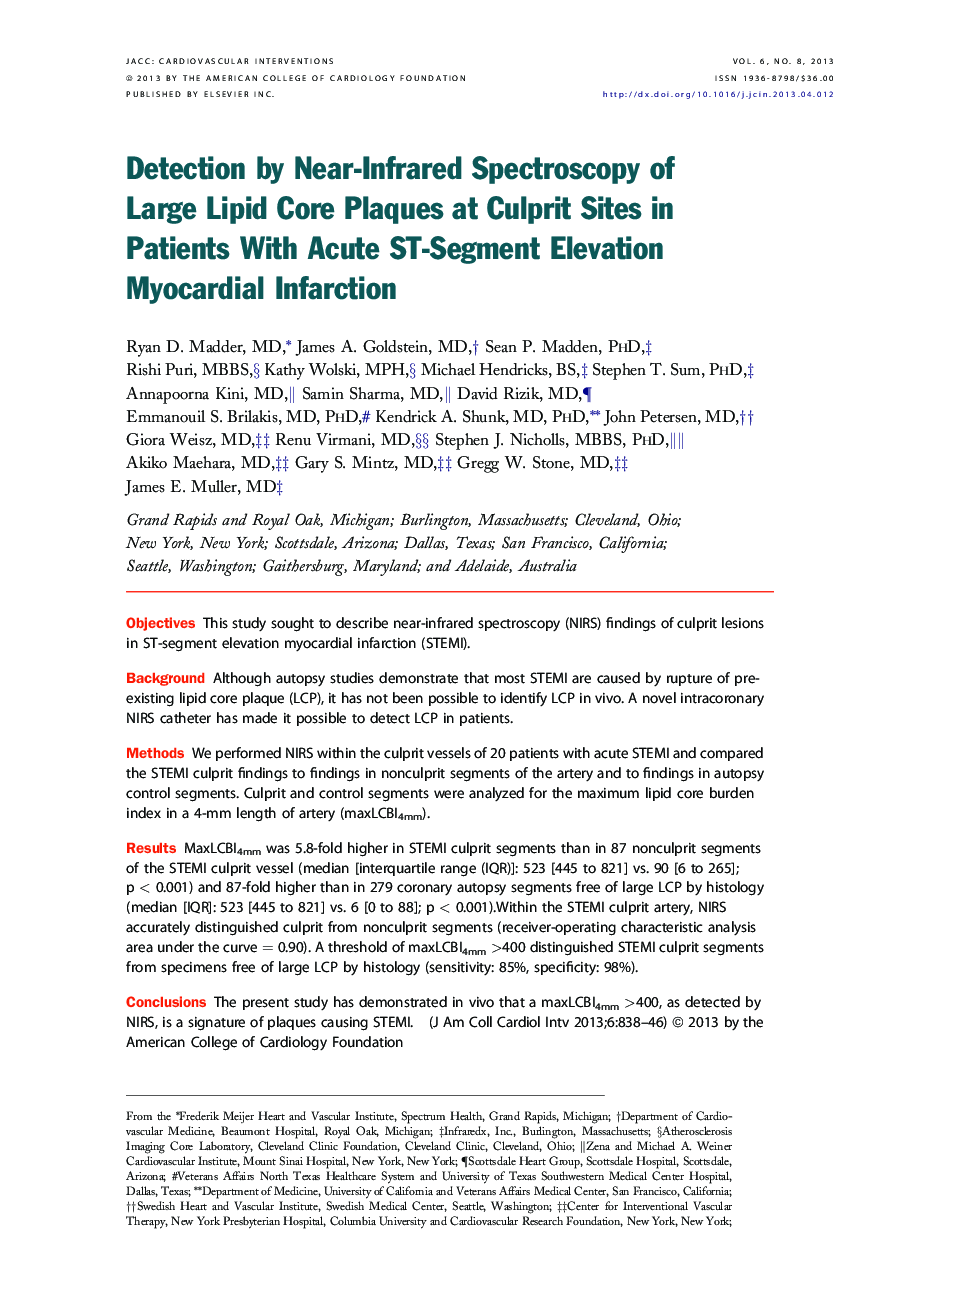 Detection by Near-Infrared Spectroscopy of Large Lipid Core Plaques at Culprit Sites in Patients With Acute ST-Segment Elevation Myocardial Infarction 